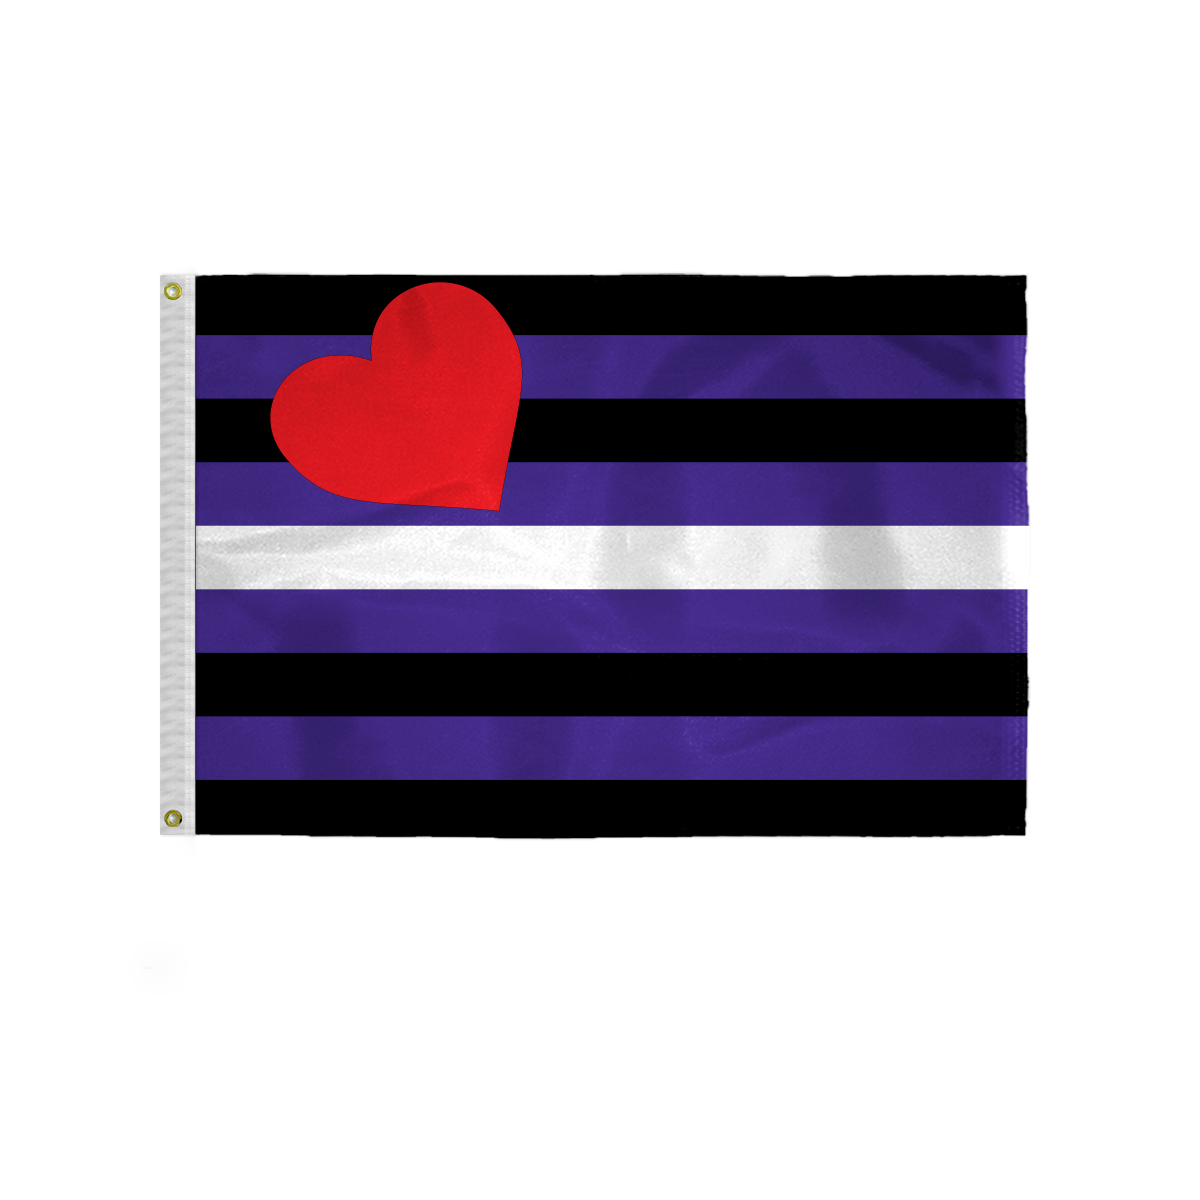 AGAS Leather Pride Flag 2x3 ft - Printed Single Sided on 200D Nylon